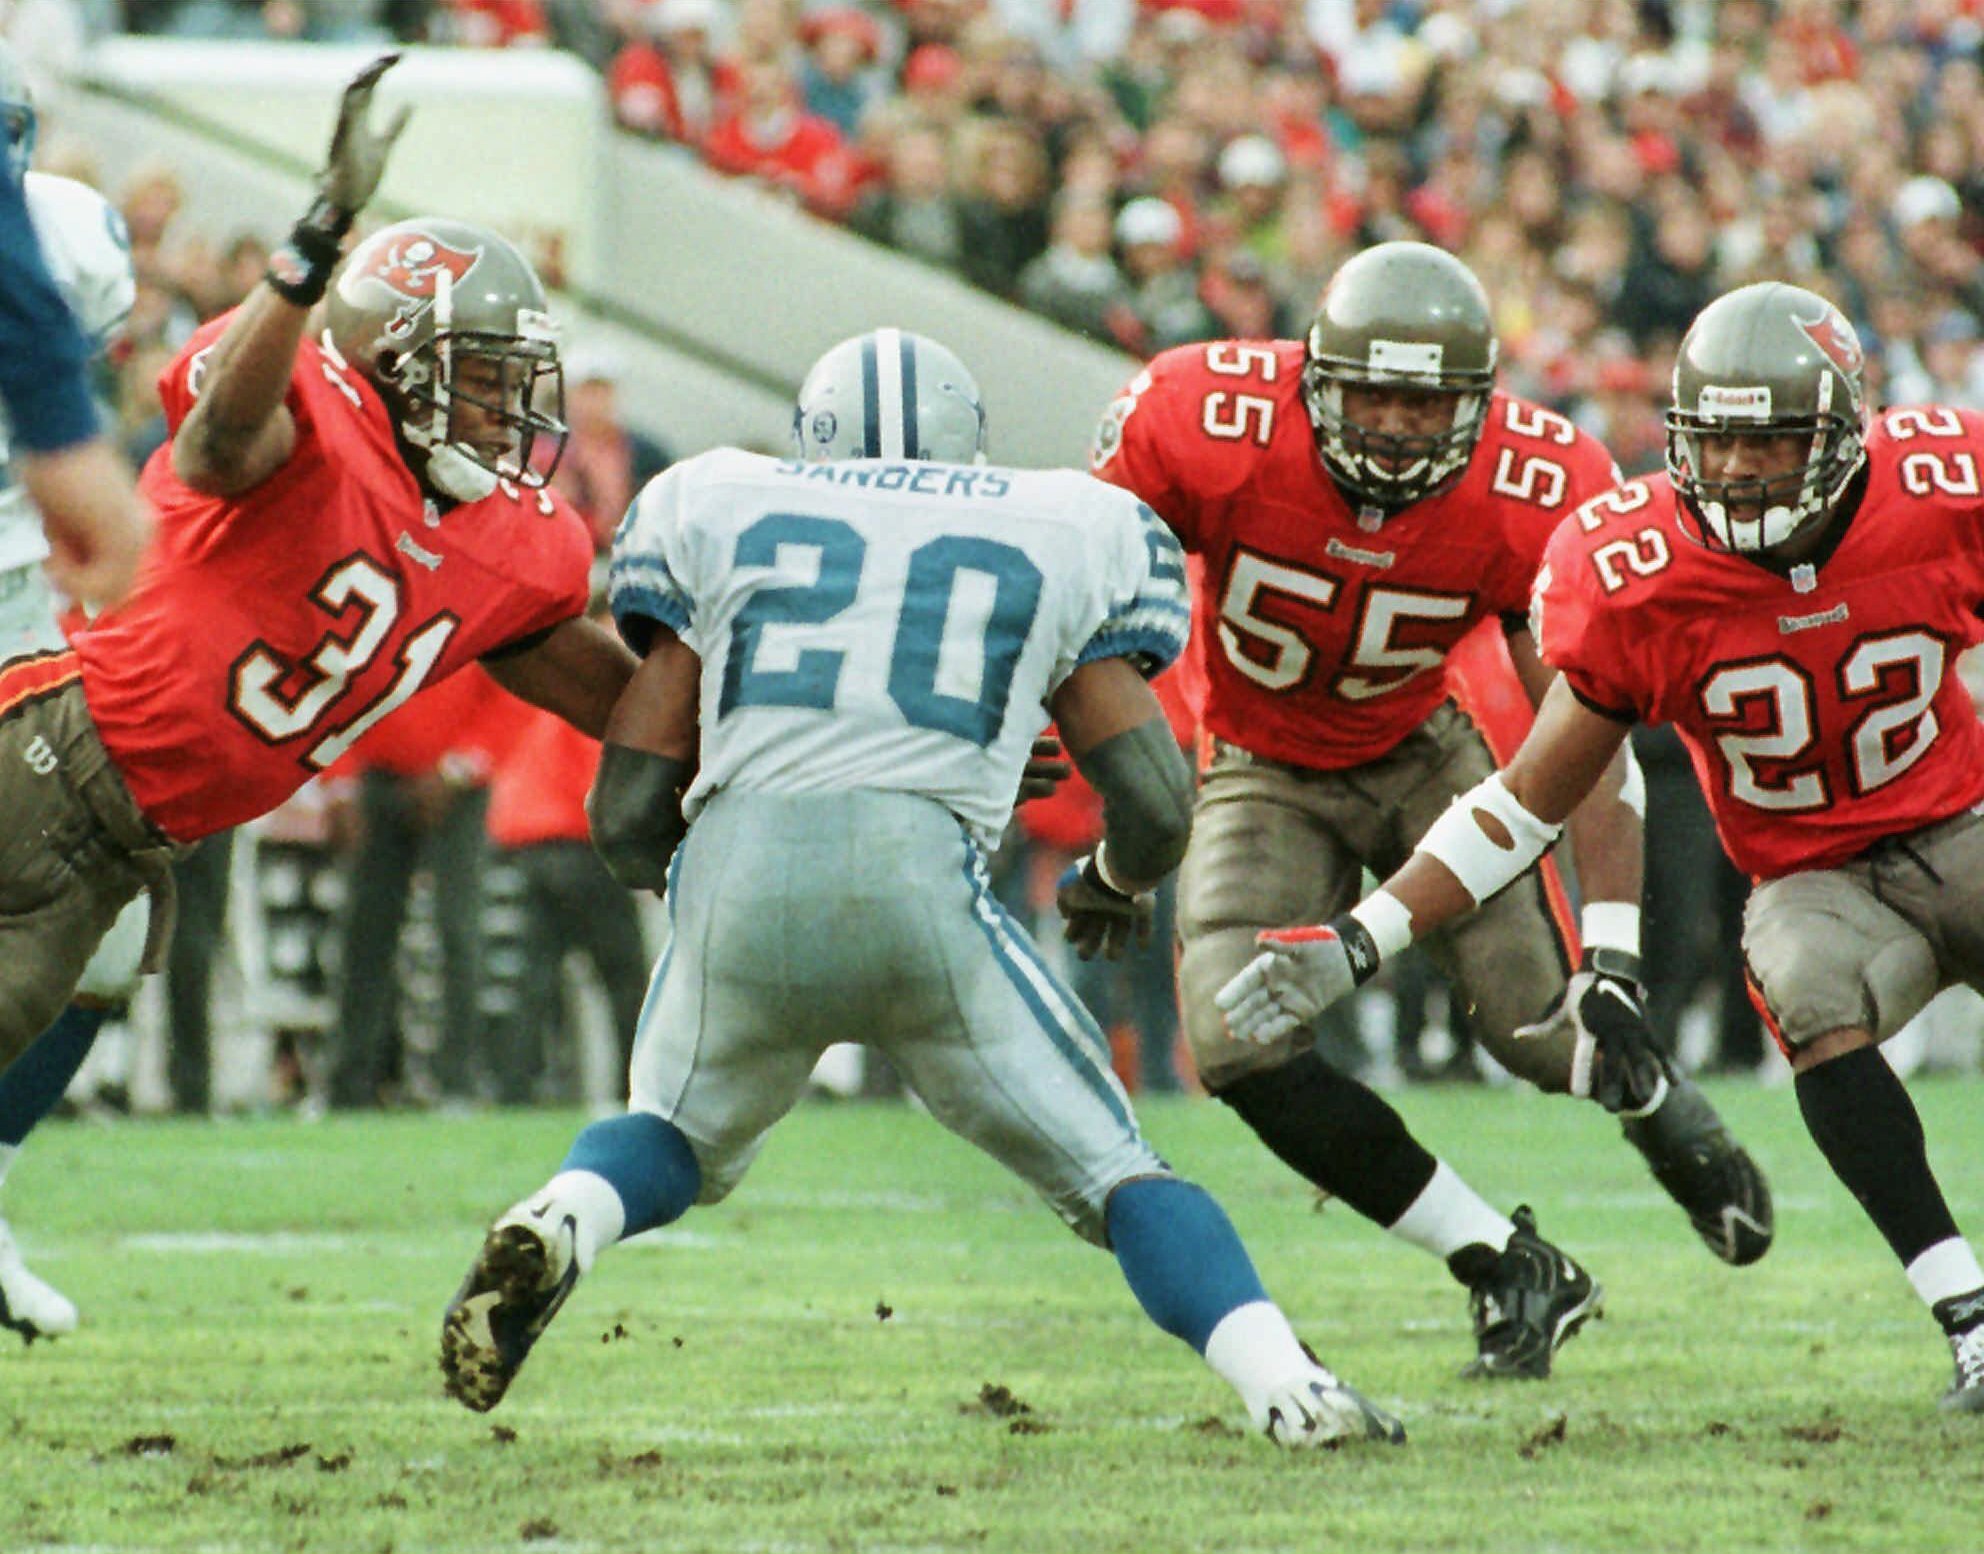 Lions-Buccaneers history: NFC Central foes and playoff heartbreak -  mlive.com